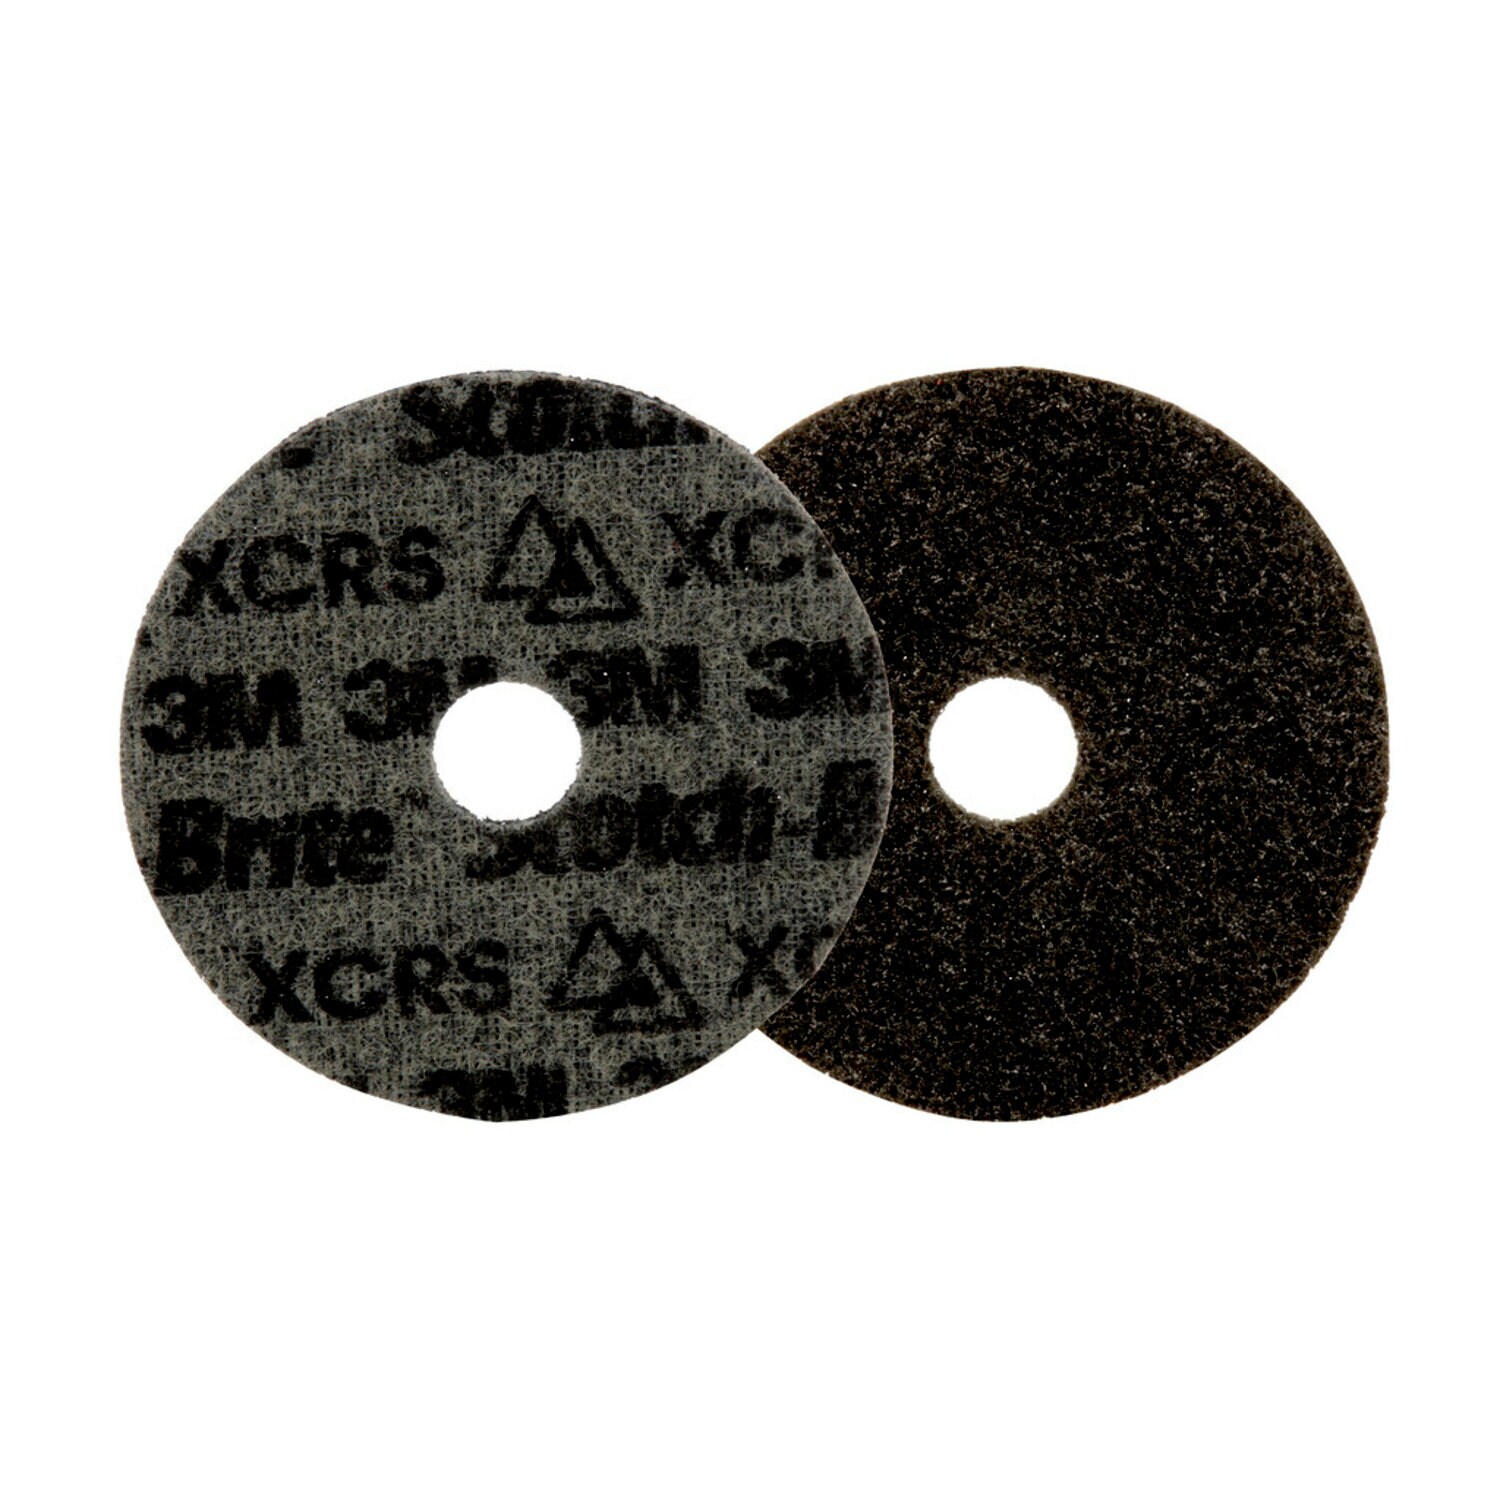 7100263887 - Scotch-Brite Precision Surface Conditioning Disc, PN-DH, Extra Coarse, 4-1/2 in x 7/8 in, 50 ea/Case